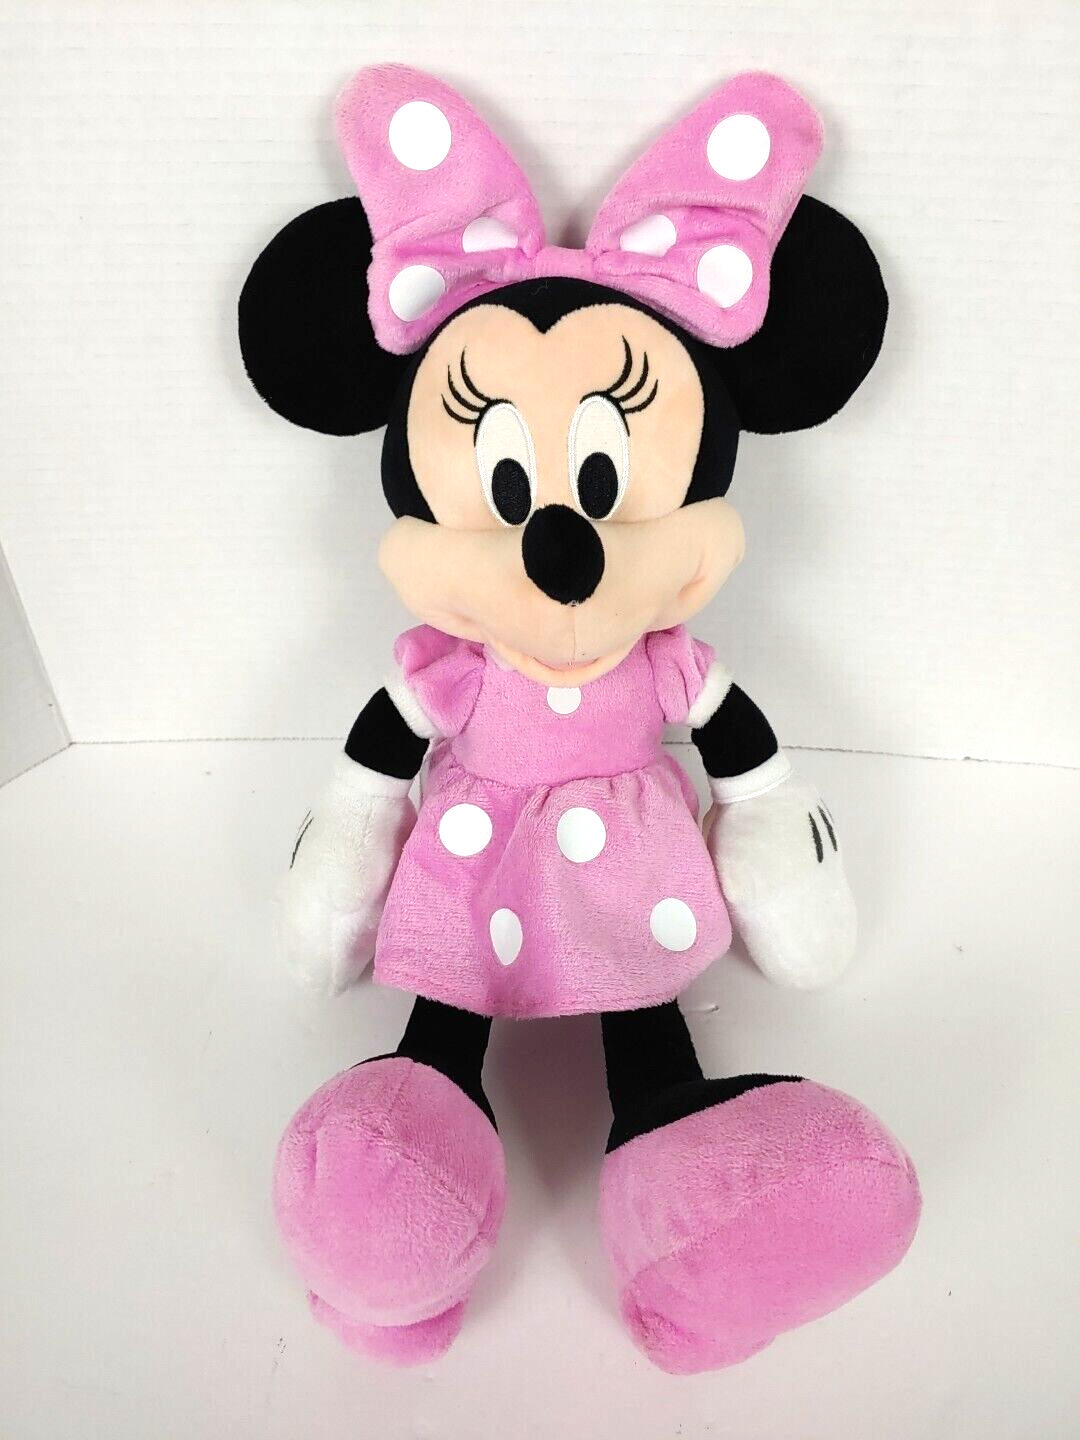 Minnie Mouse plush, pink dress / white polka dots (Disney) | Pre-owned, clean